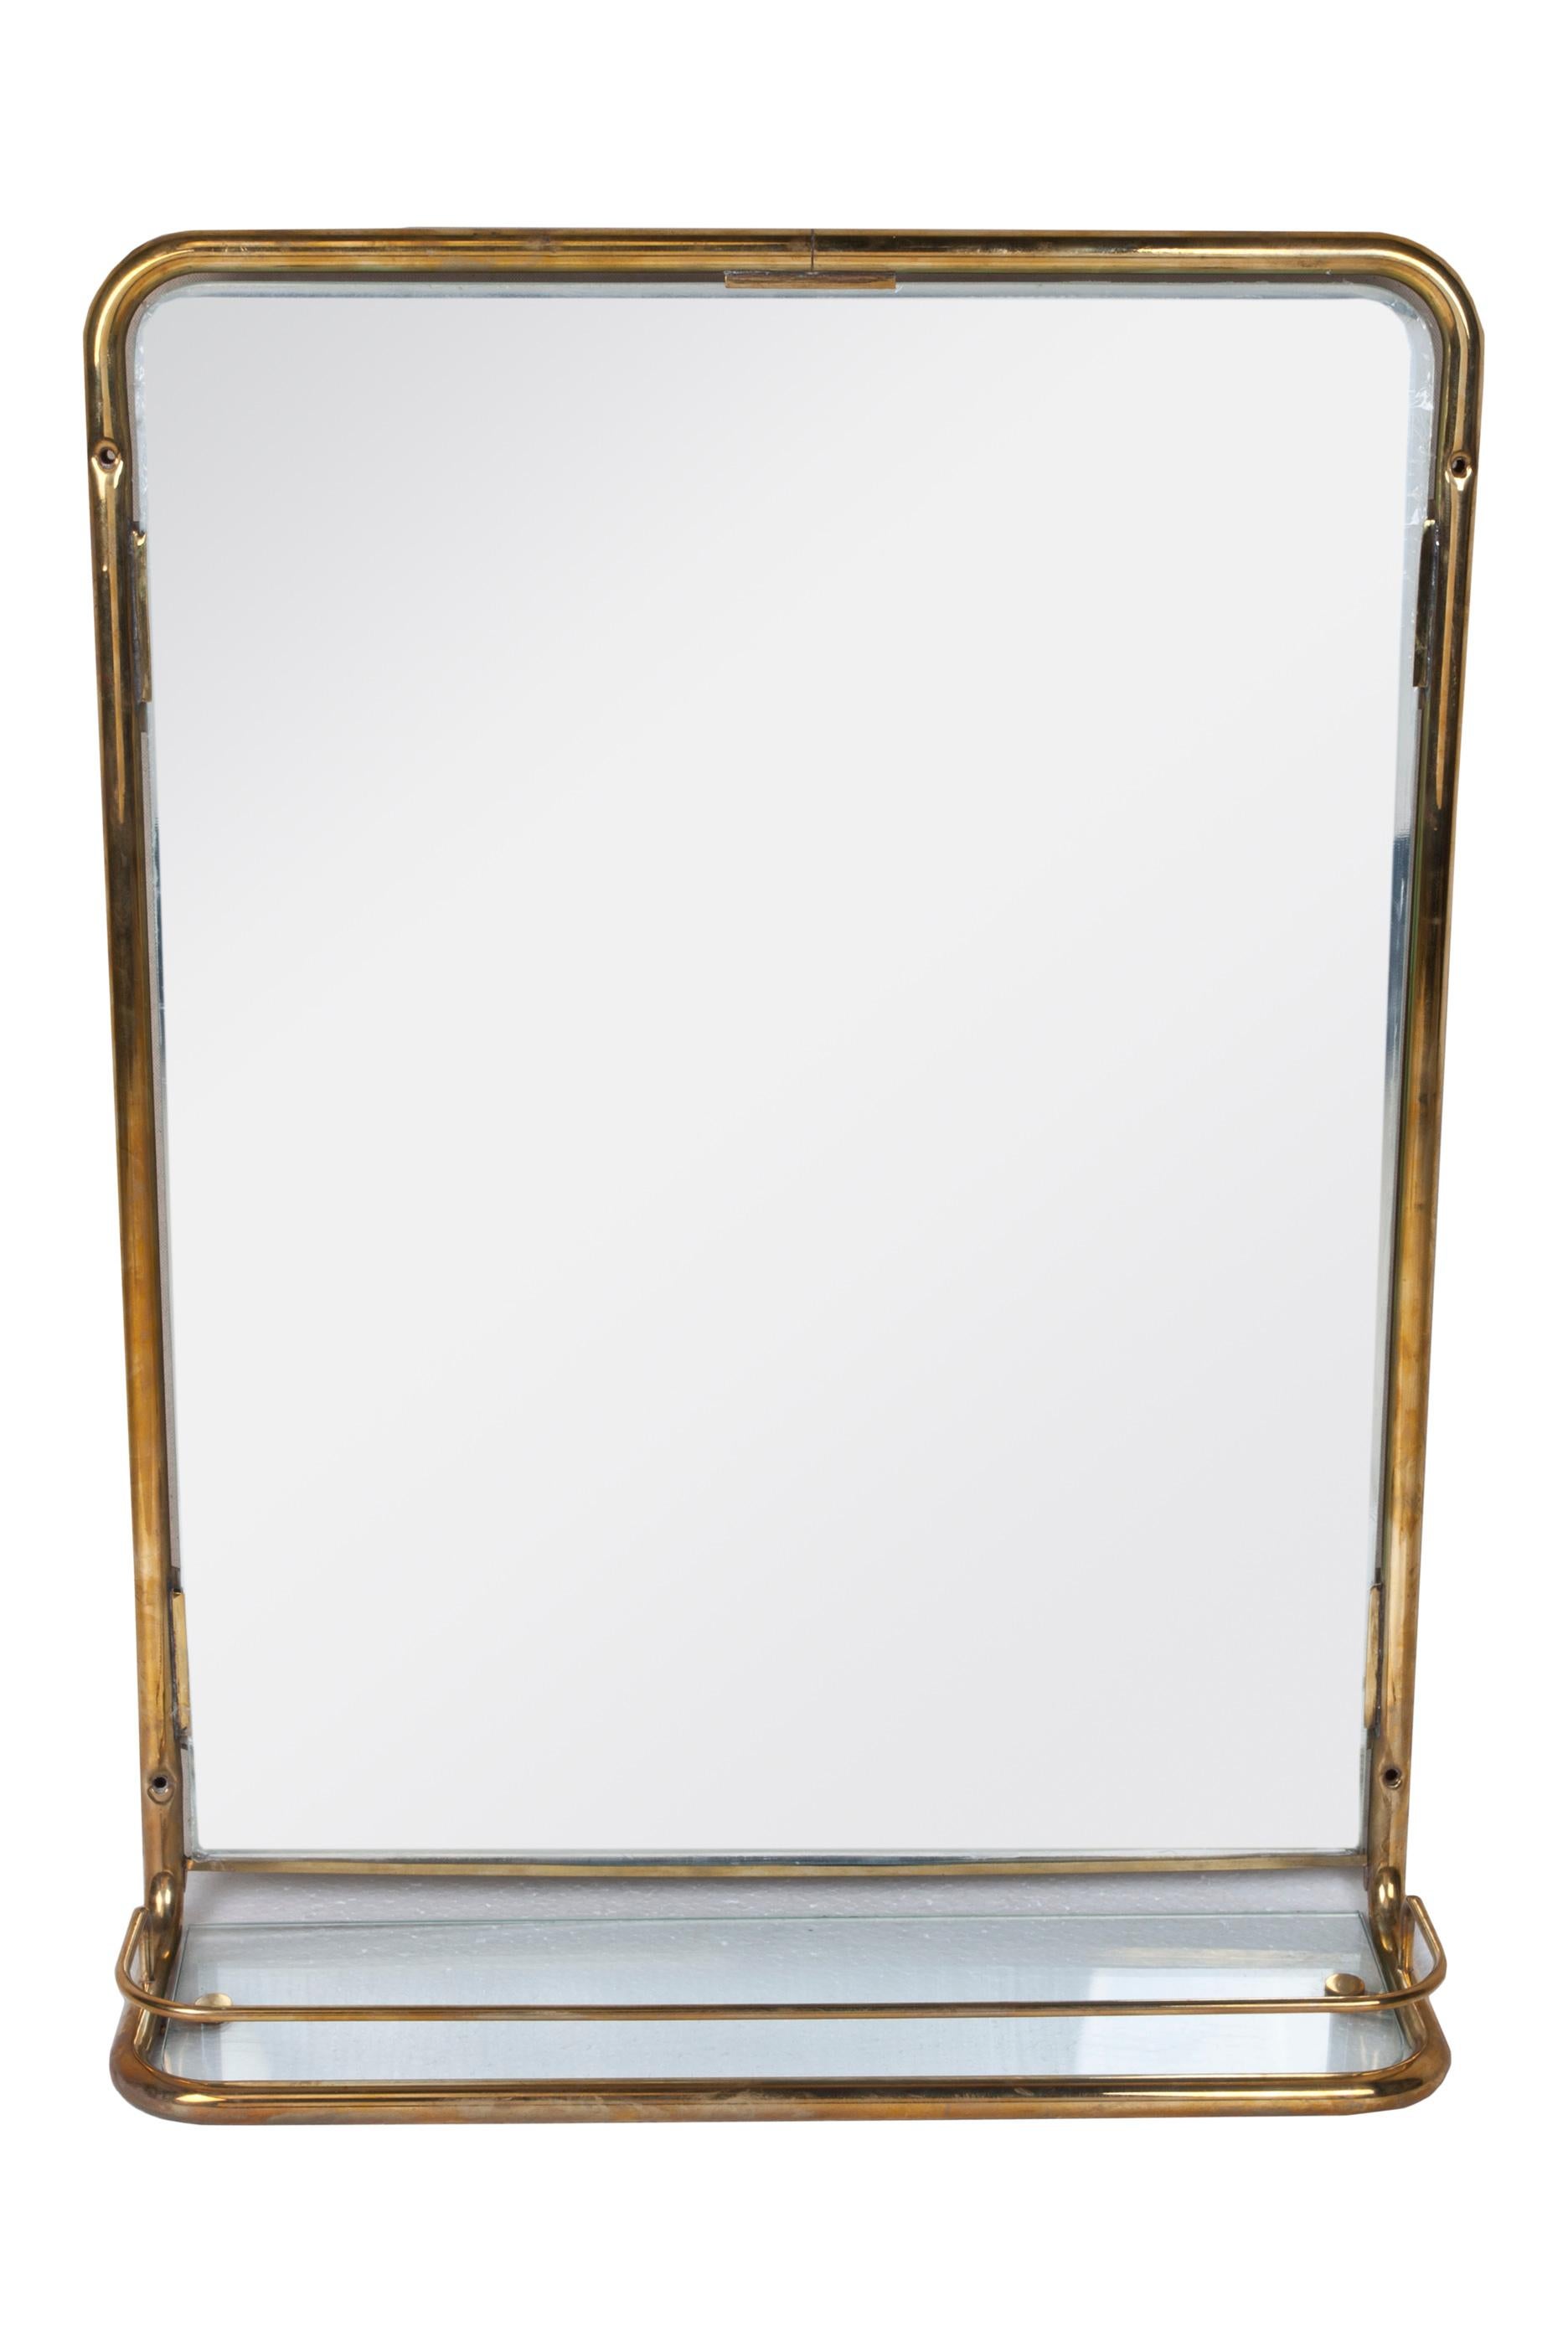 Industrial Nautical Brass Mirror from a Ship's Stateroom, circa 1960s